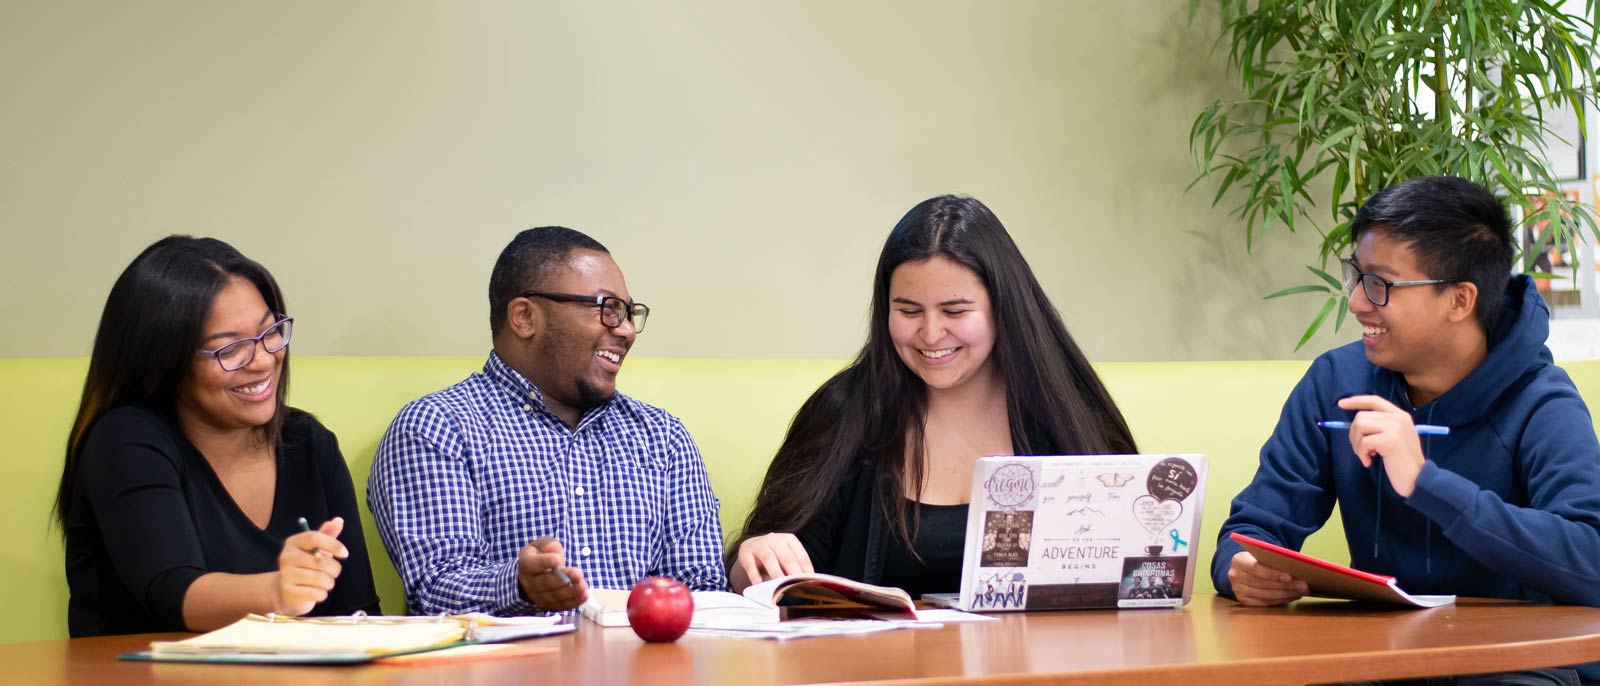 Four undergraduate students sit at a booth and smile as they study together.